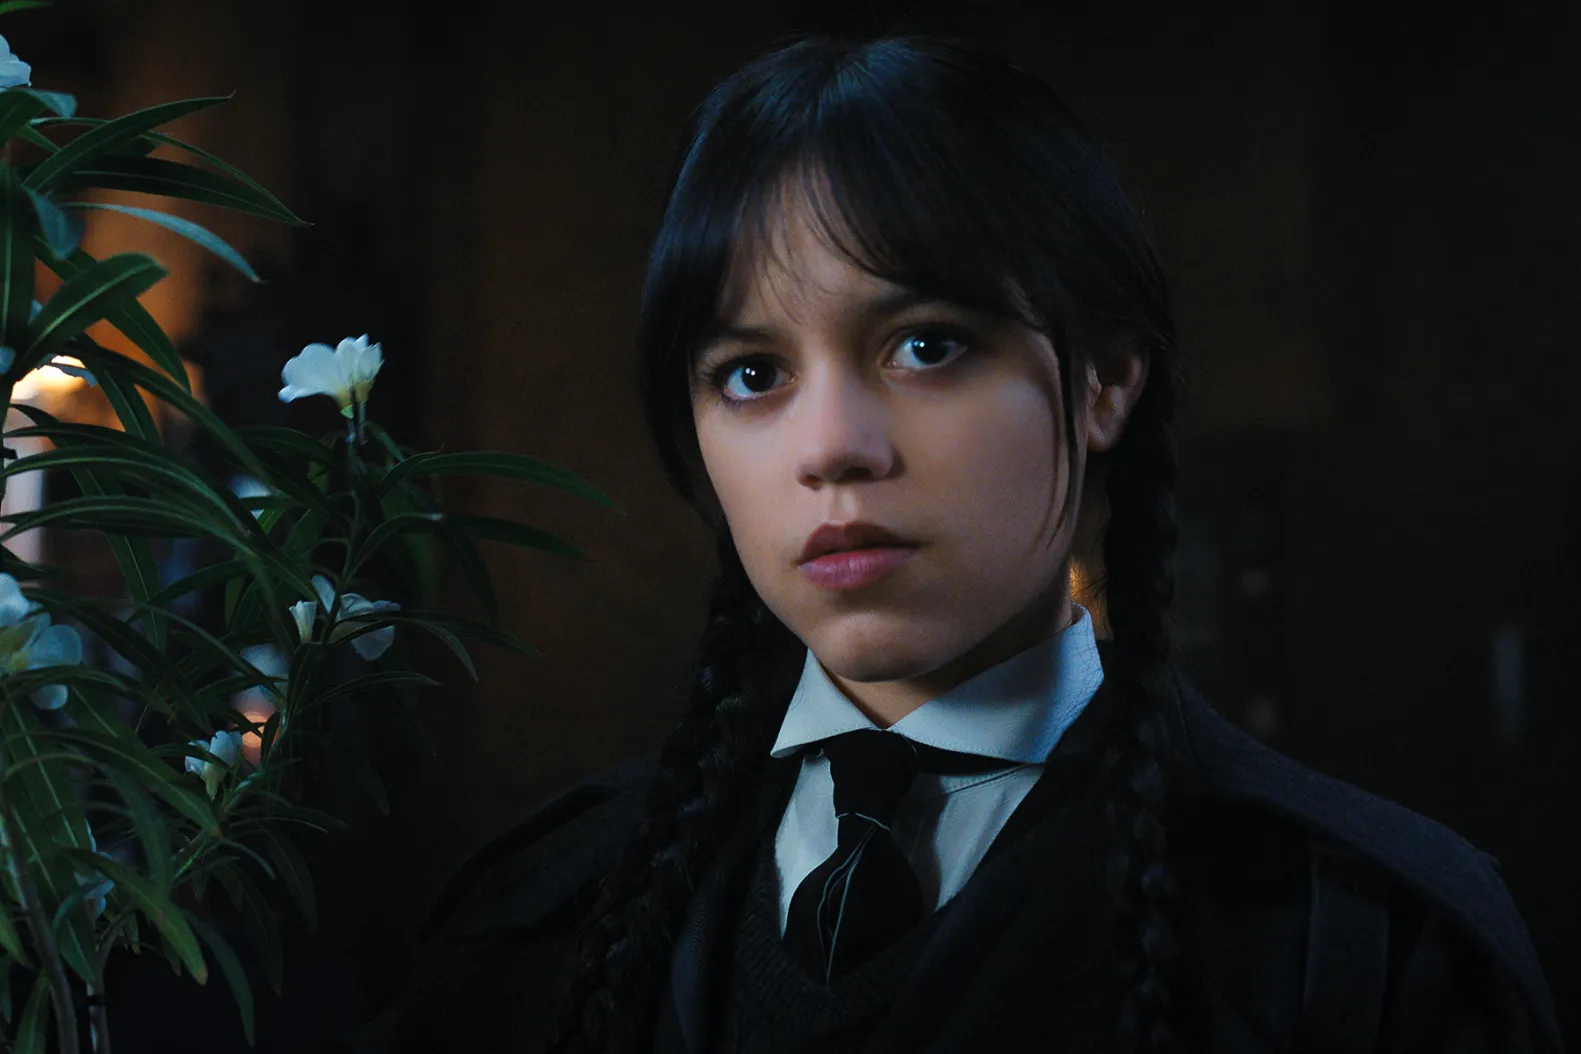 Jenna Ortega in and as Wednesday